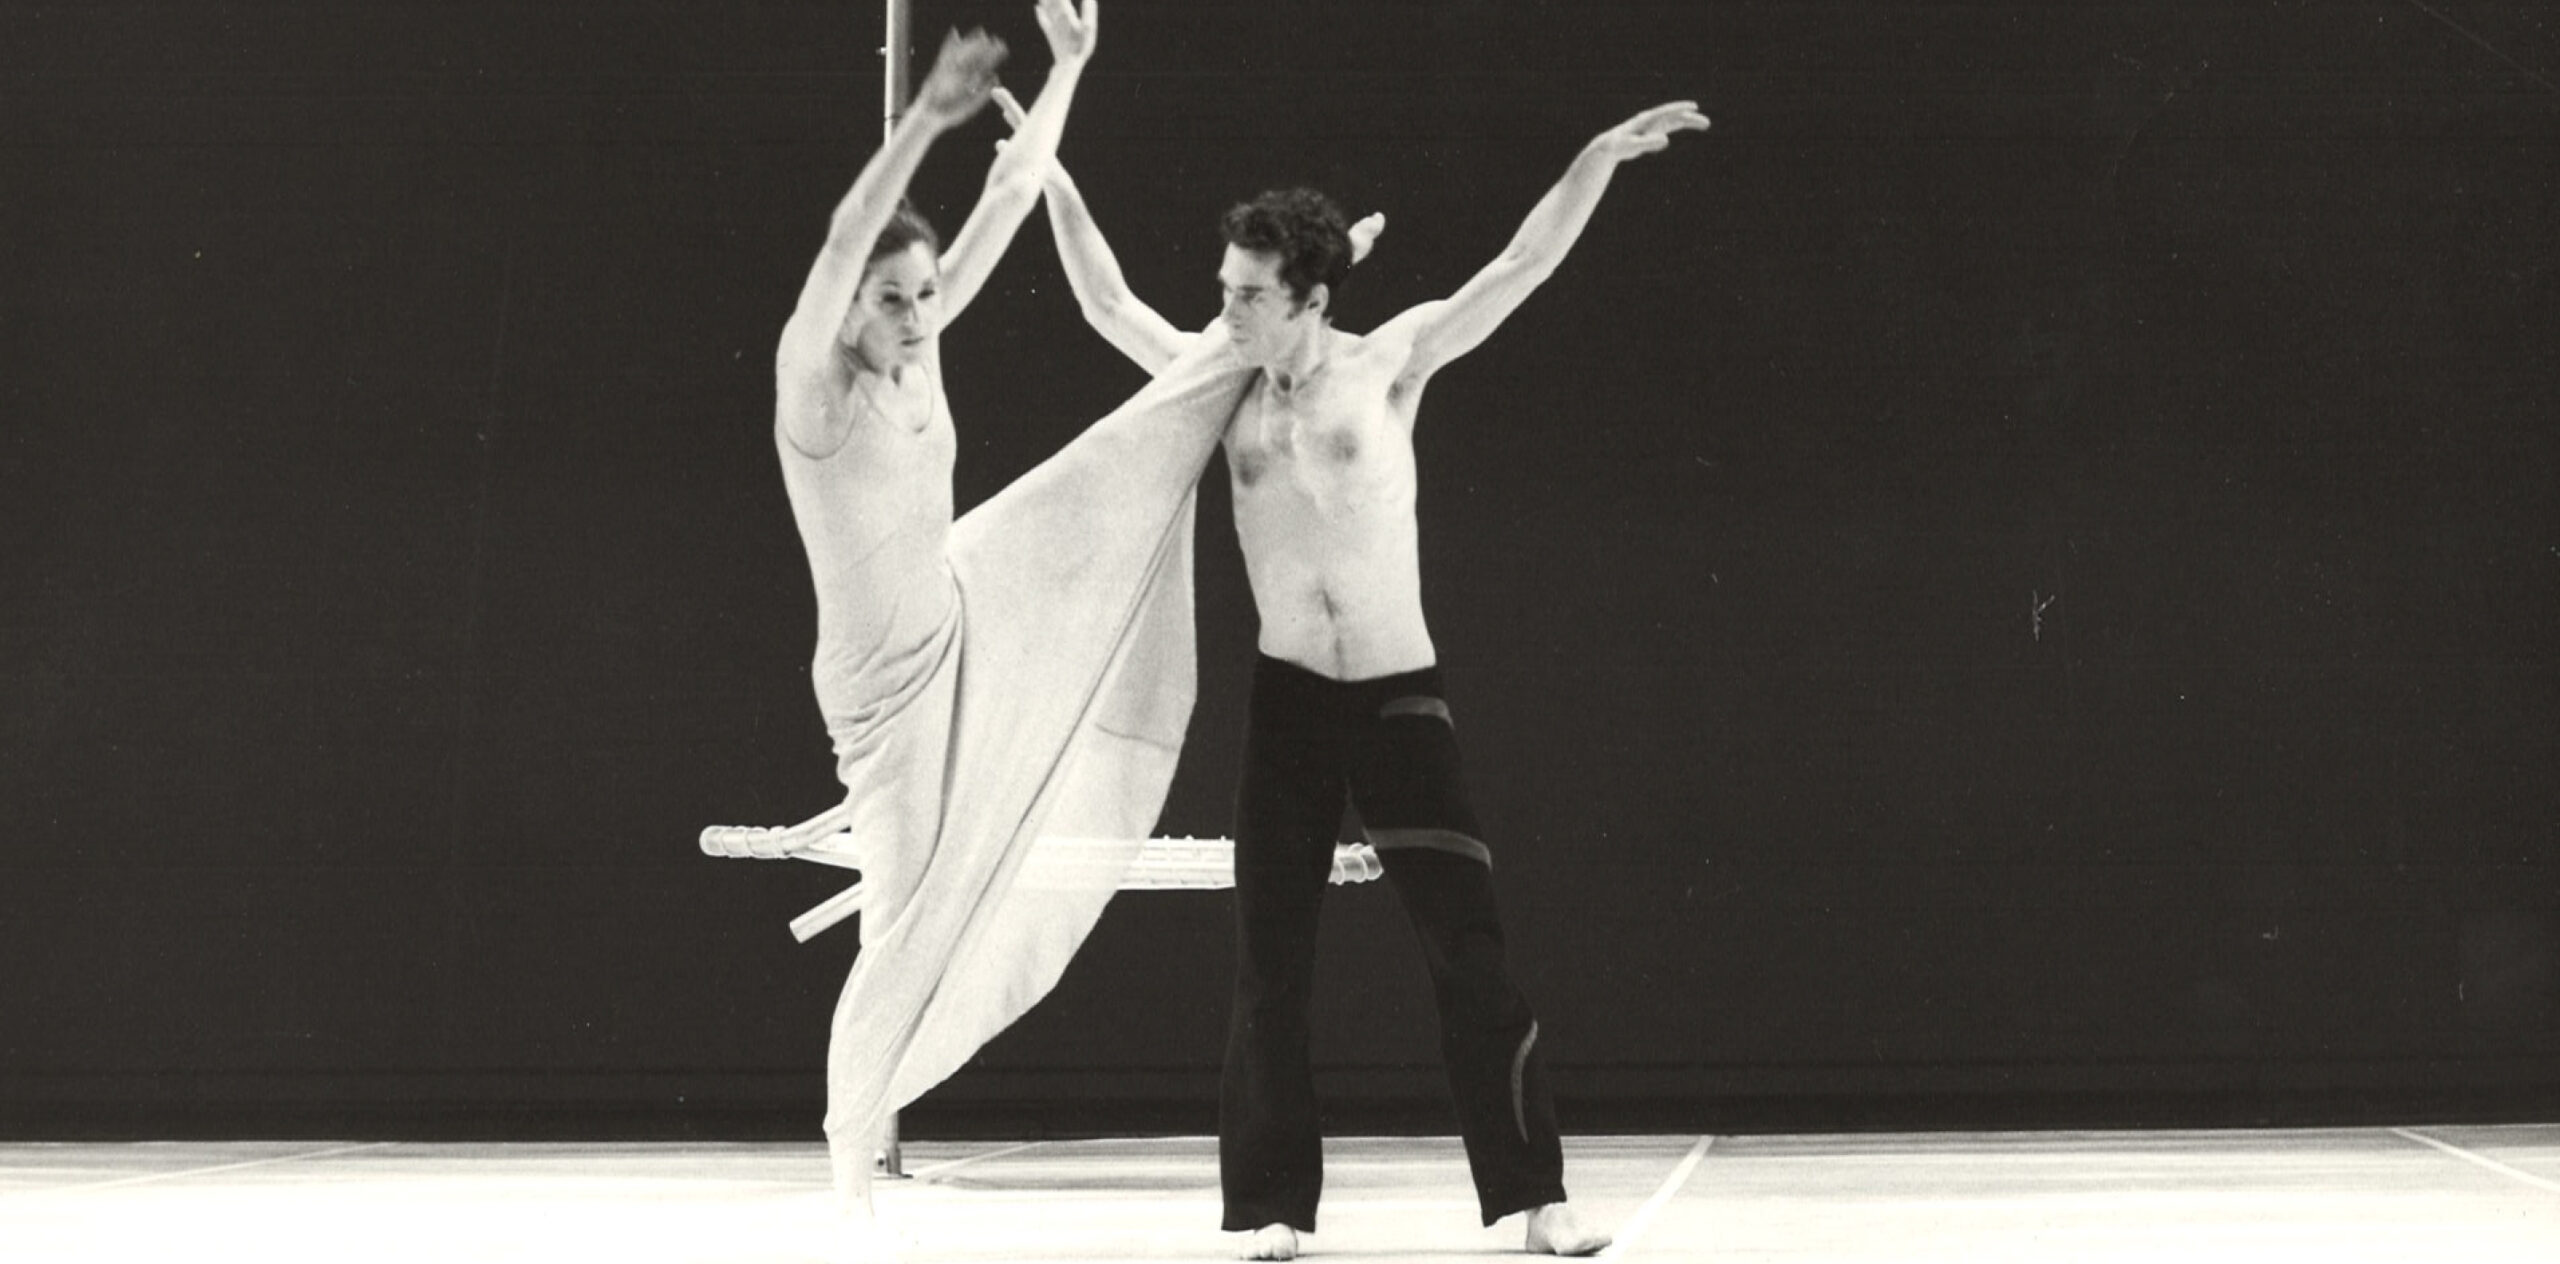 In an archive black-and-white photo, two dancers are performing on a stage. One dancer lifts her leg up straight and rests it on the other dancer's shoulder who is standing tall with his arms up towards the ceiling.